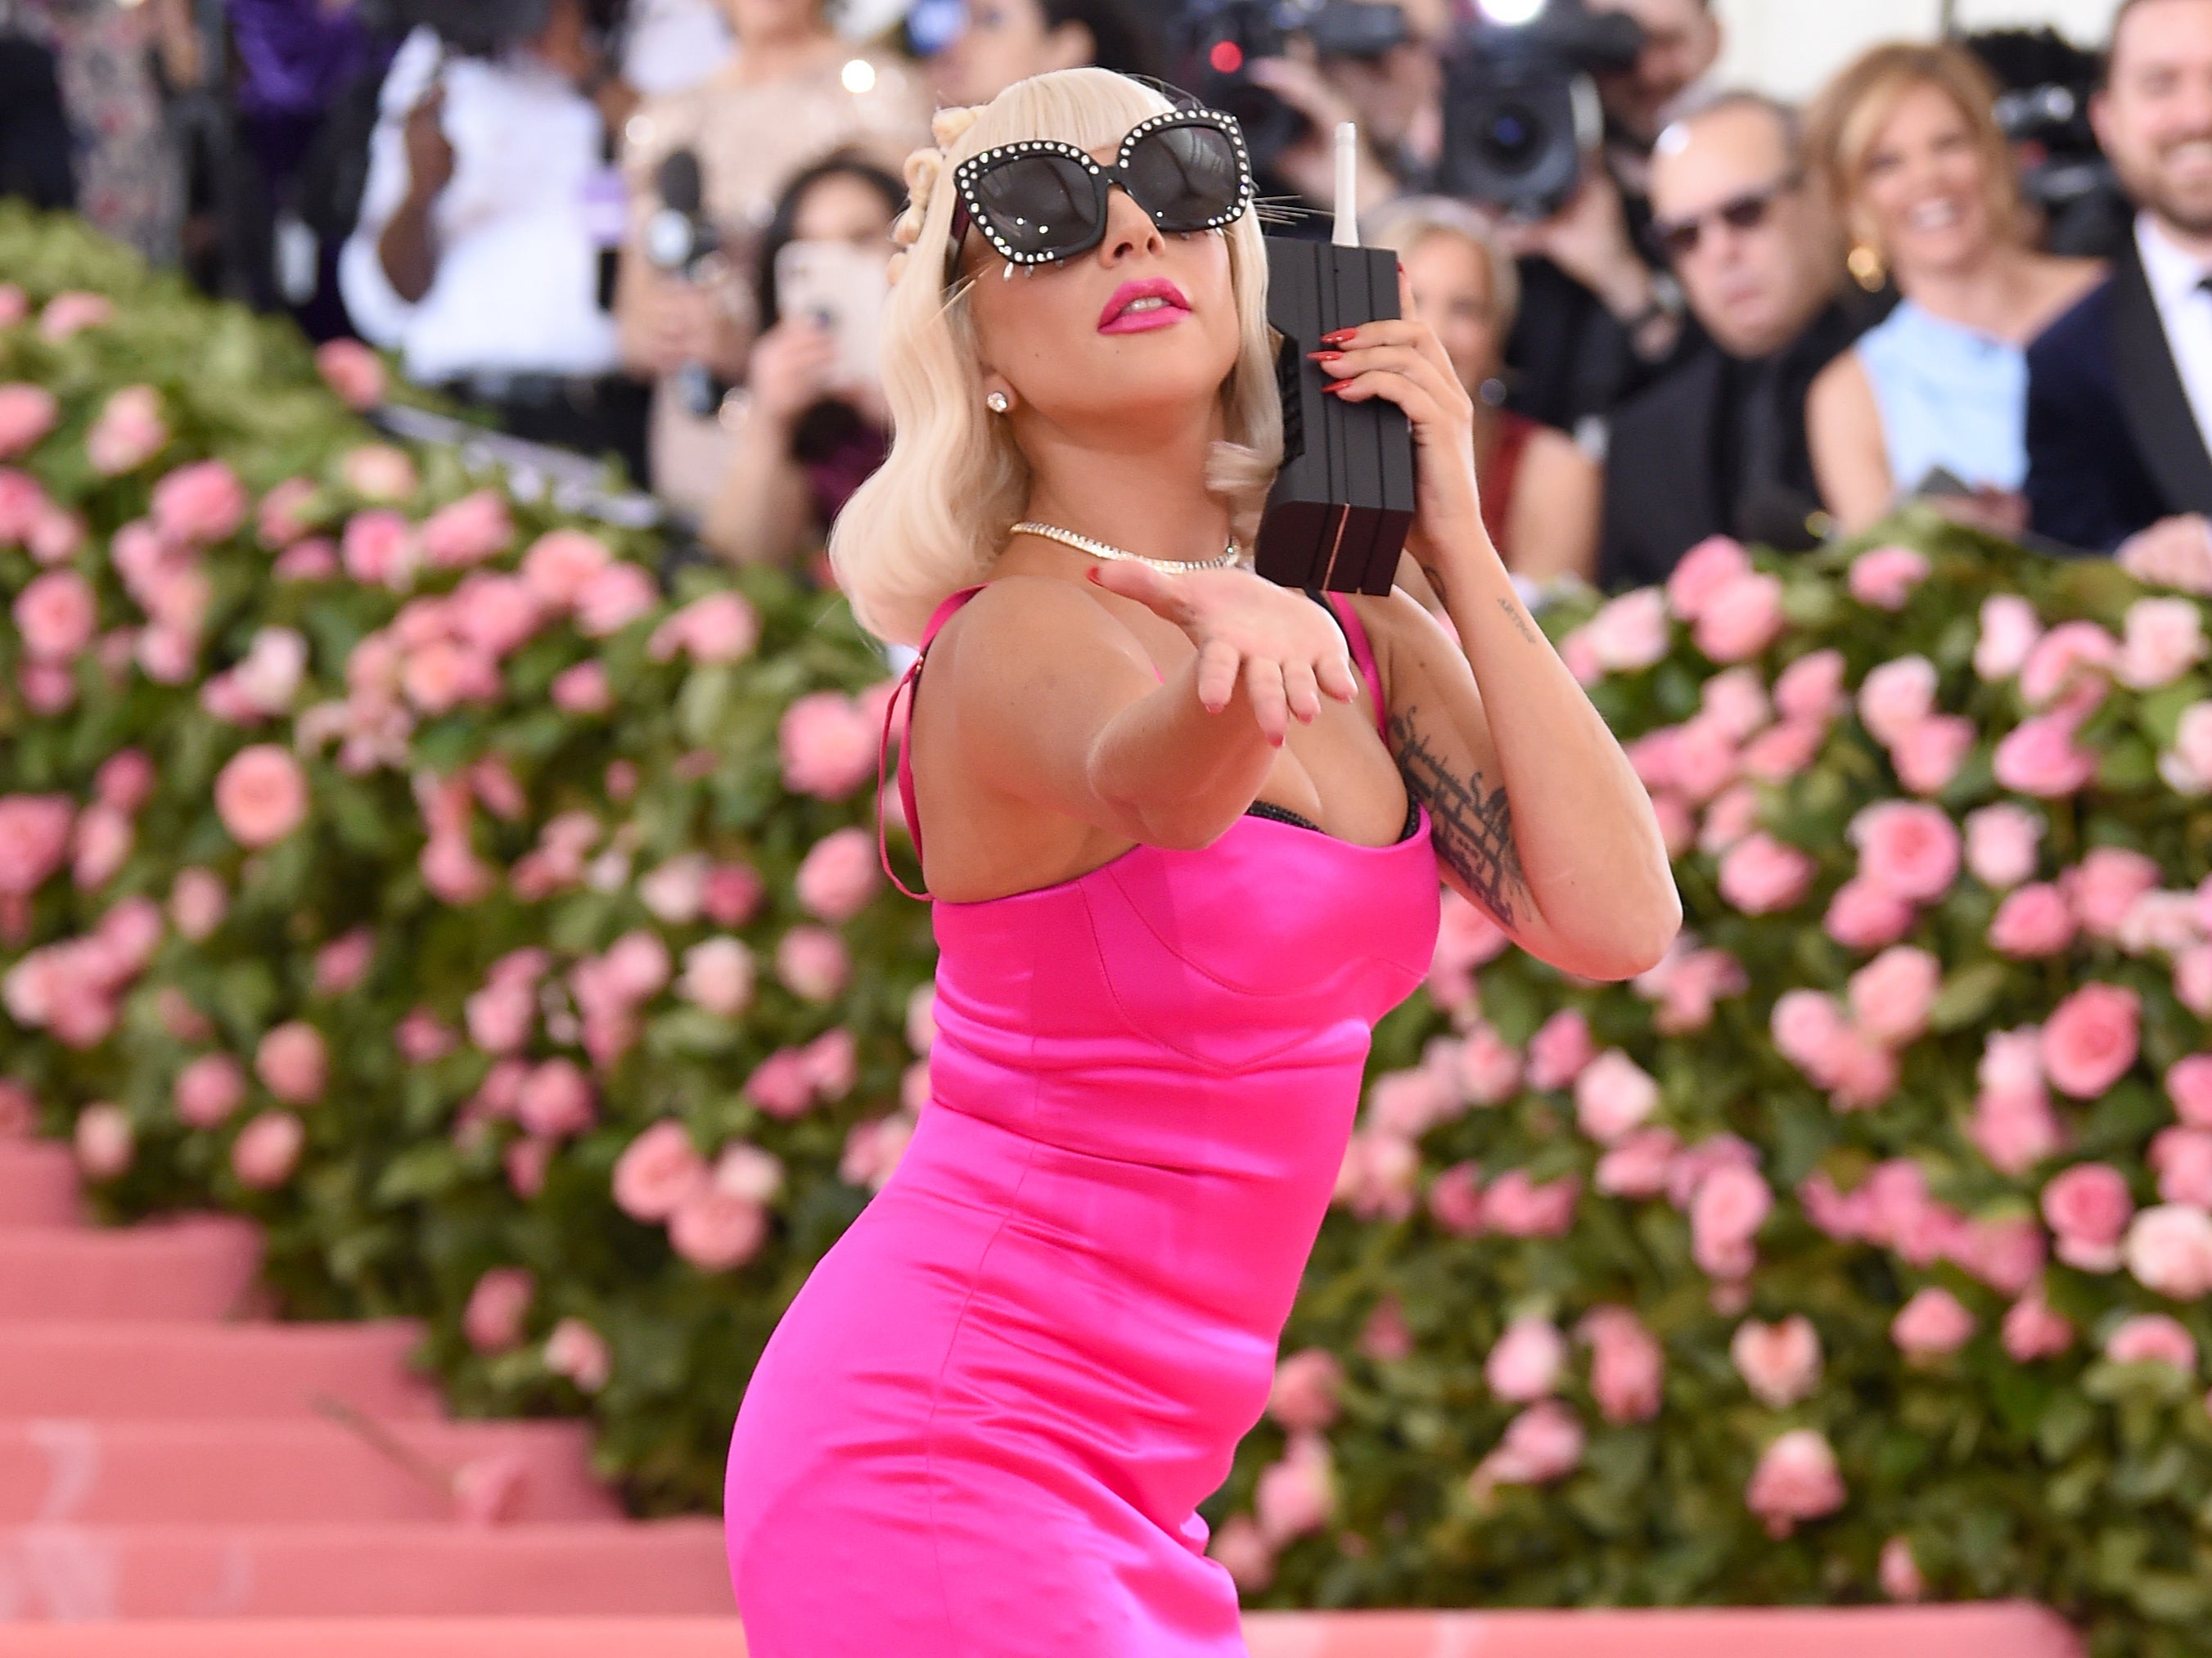 Lady Gaga attends The 2019 Met Gala Celebrating Camp: Notes on Fashion at Metropolitan Museum of Art